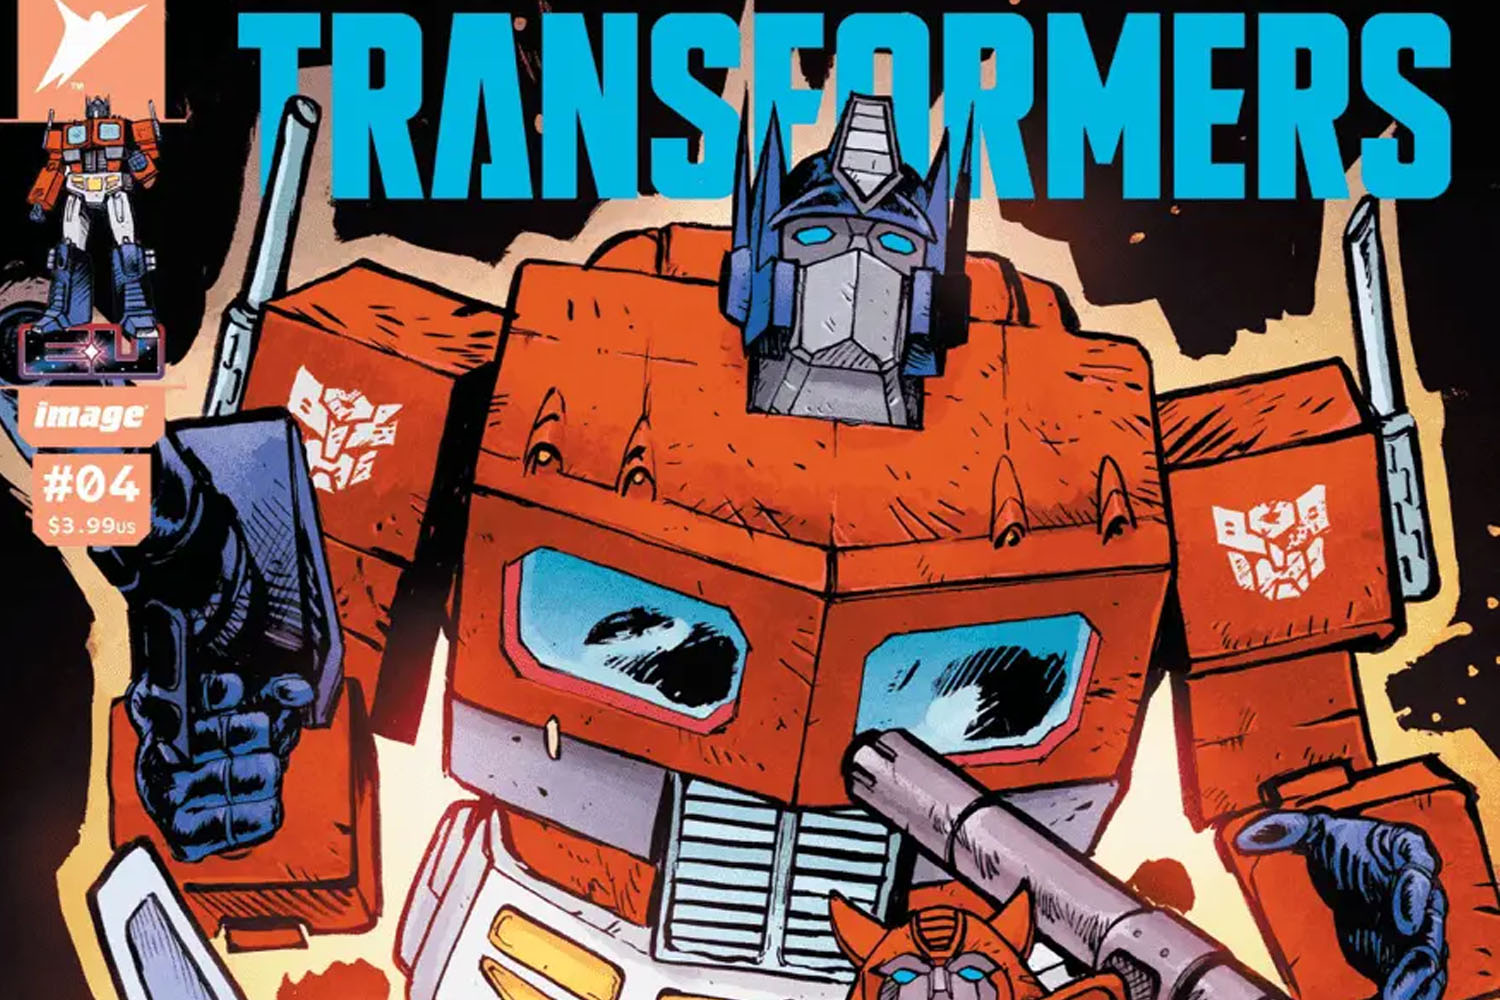 'Transformers' #4 shocks and excites